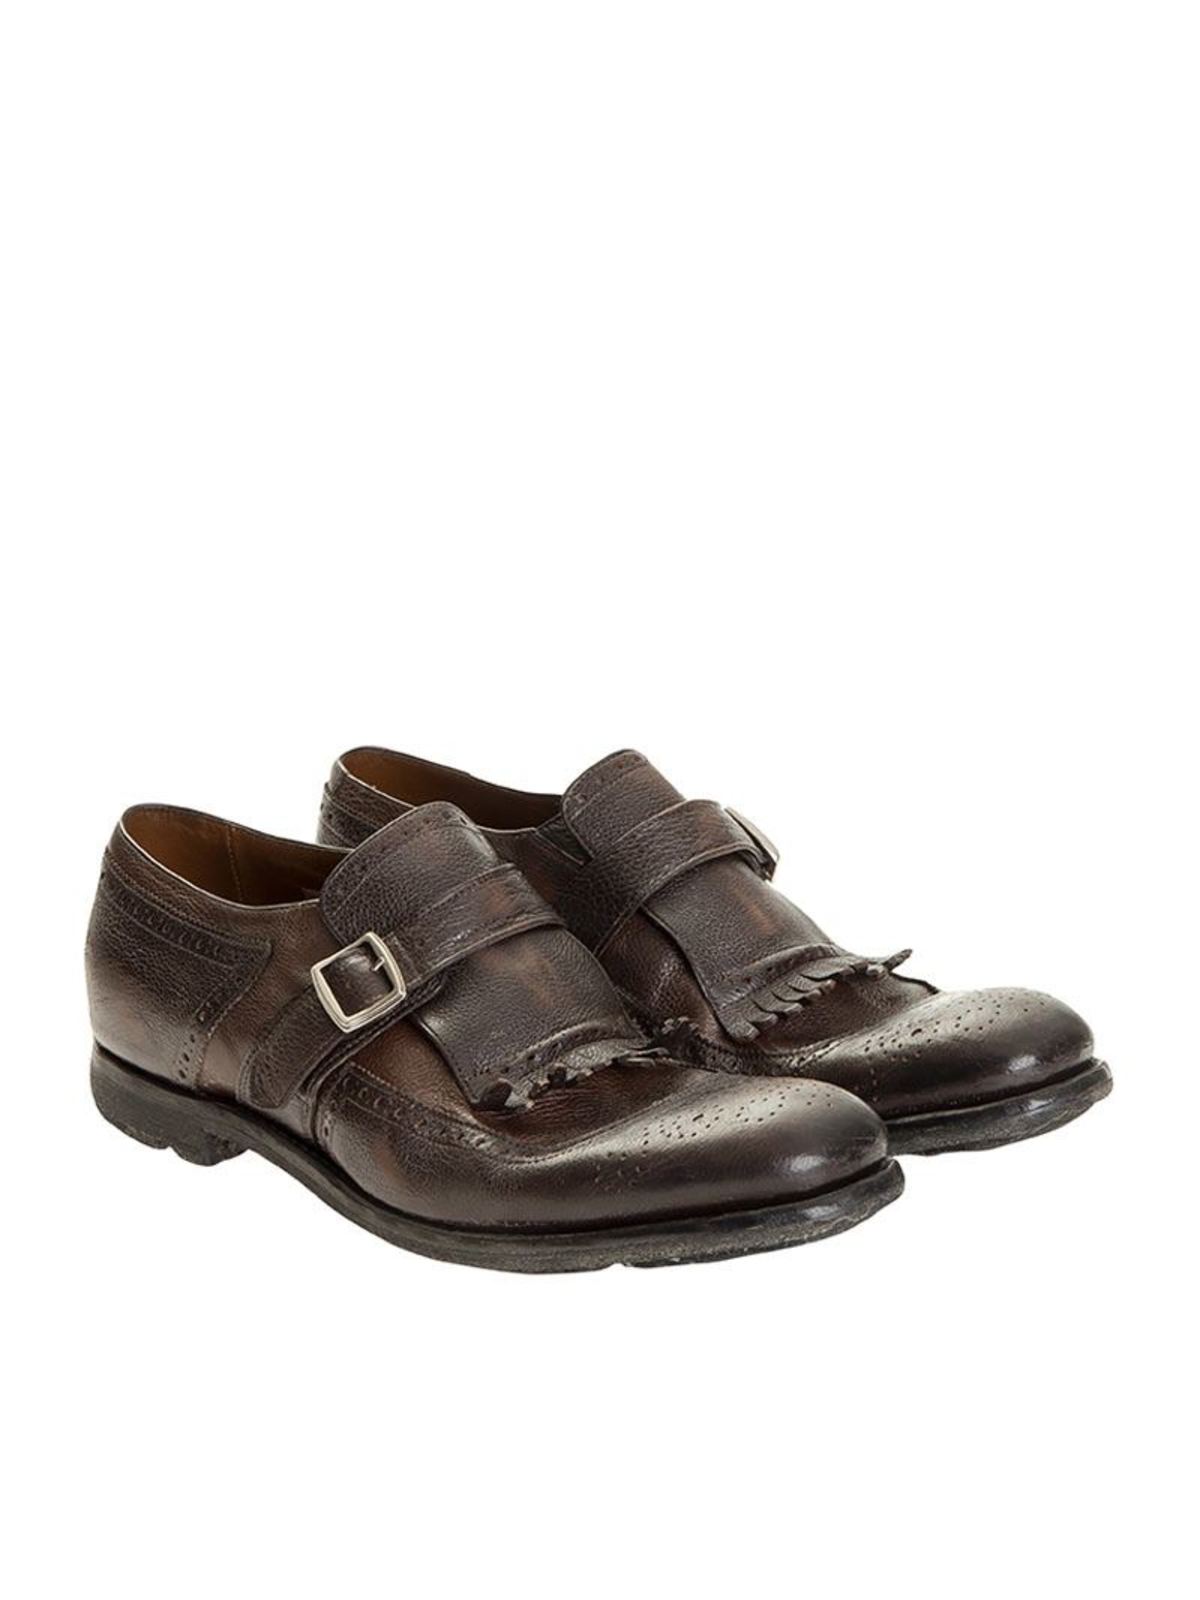 CHURCH'S LEATHER MONK STRAPS